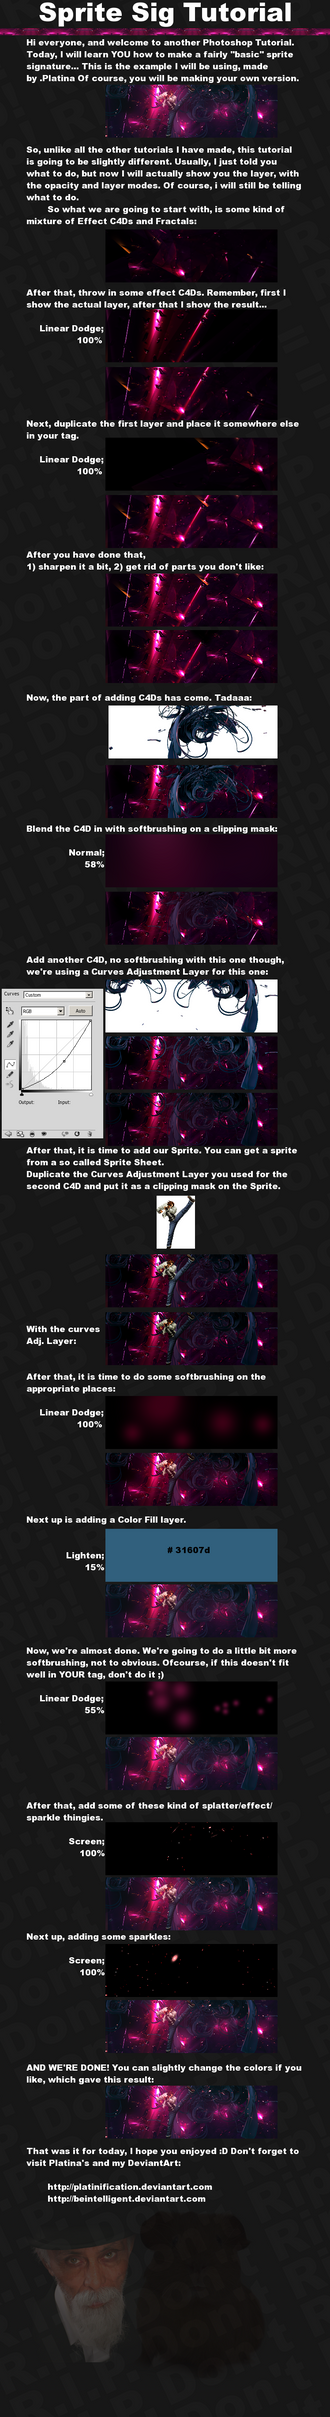 sprite_signature_tutorial_by_beintelligent-d4hy385.png